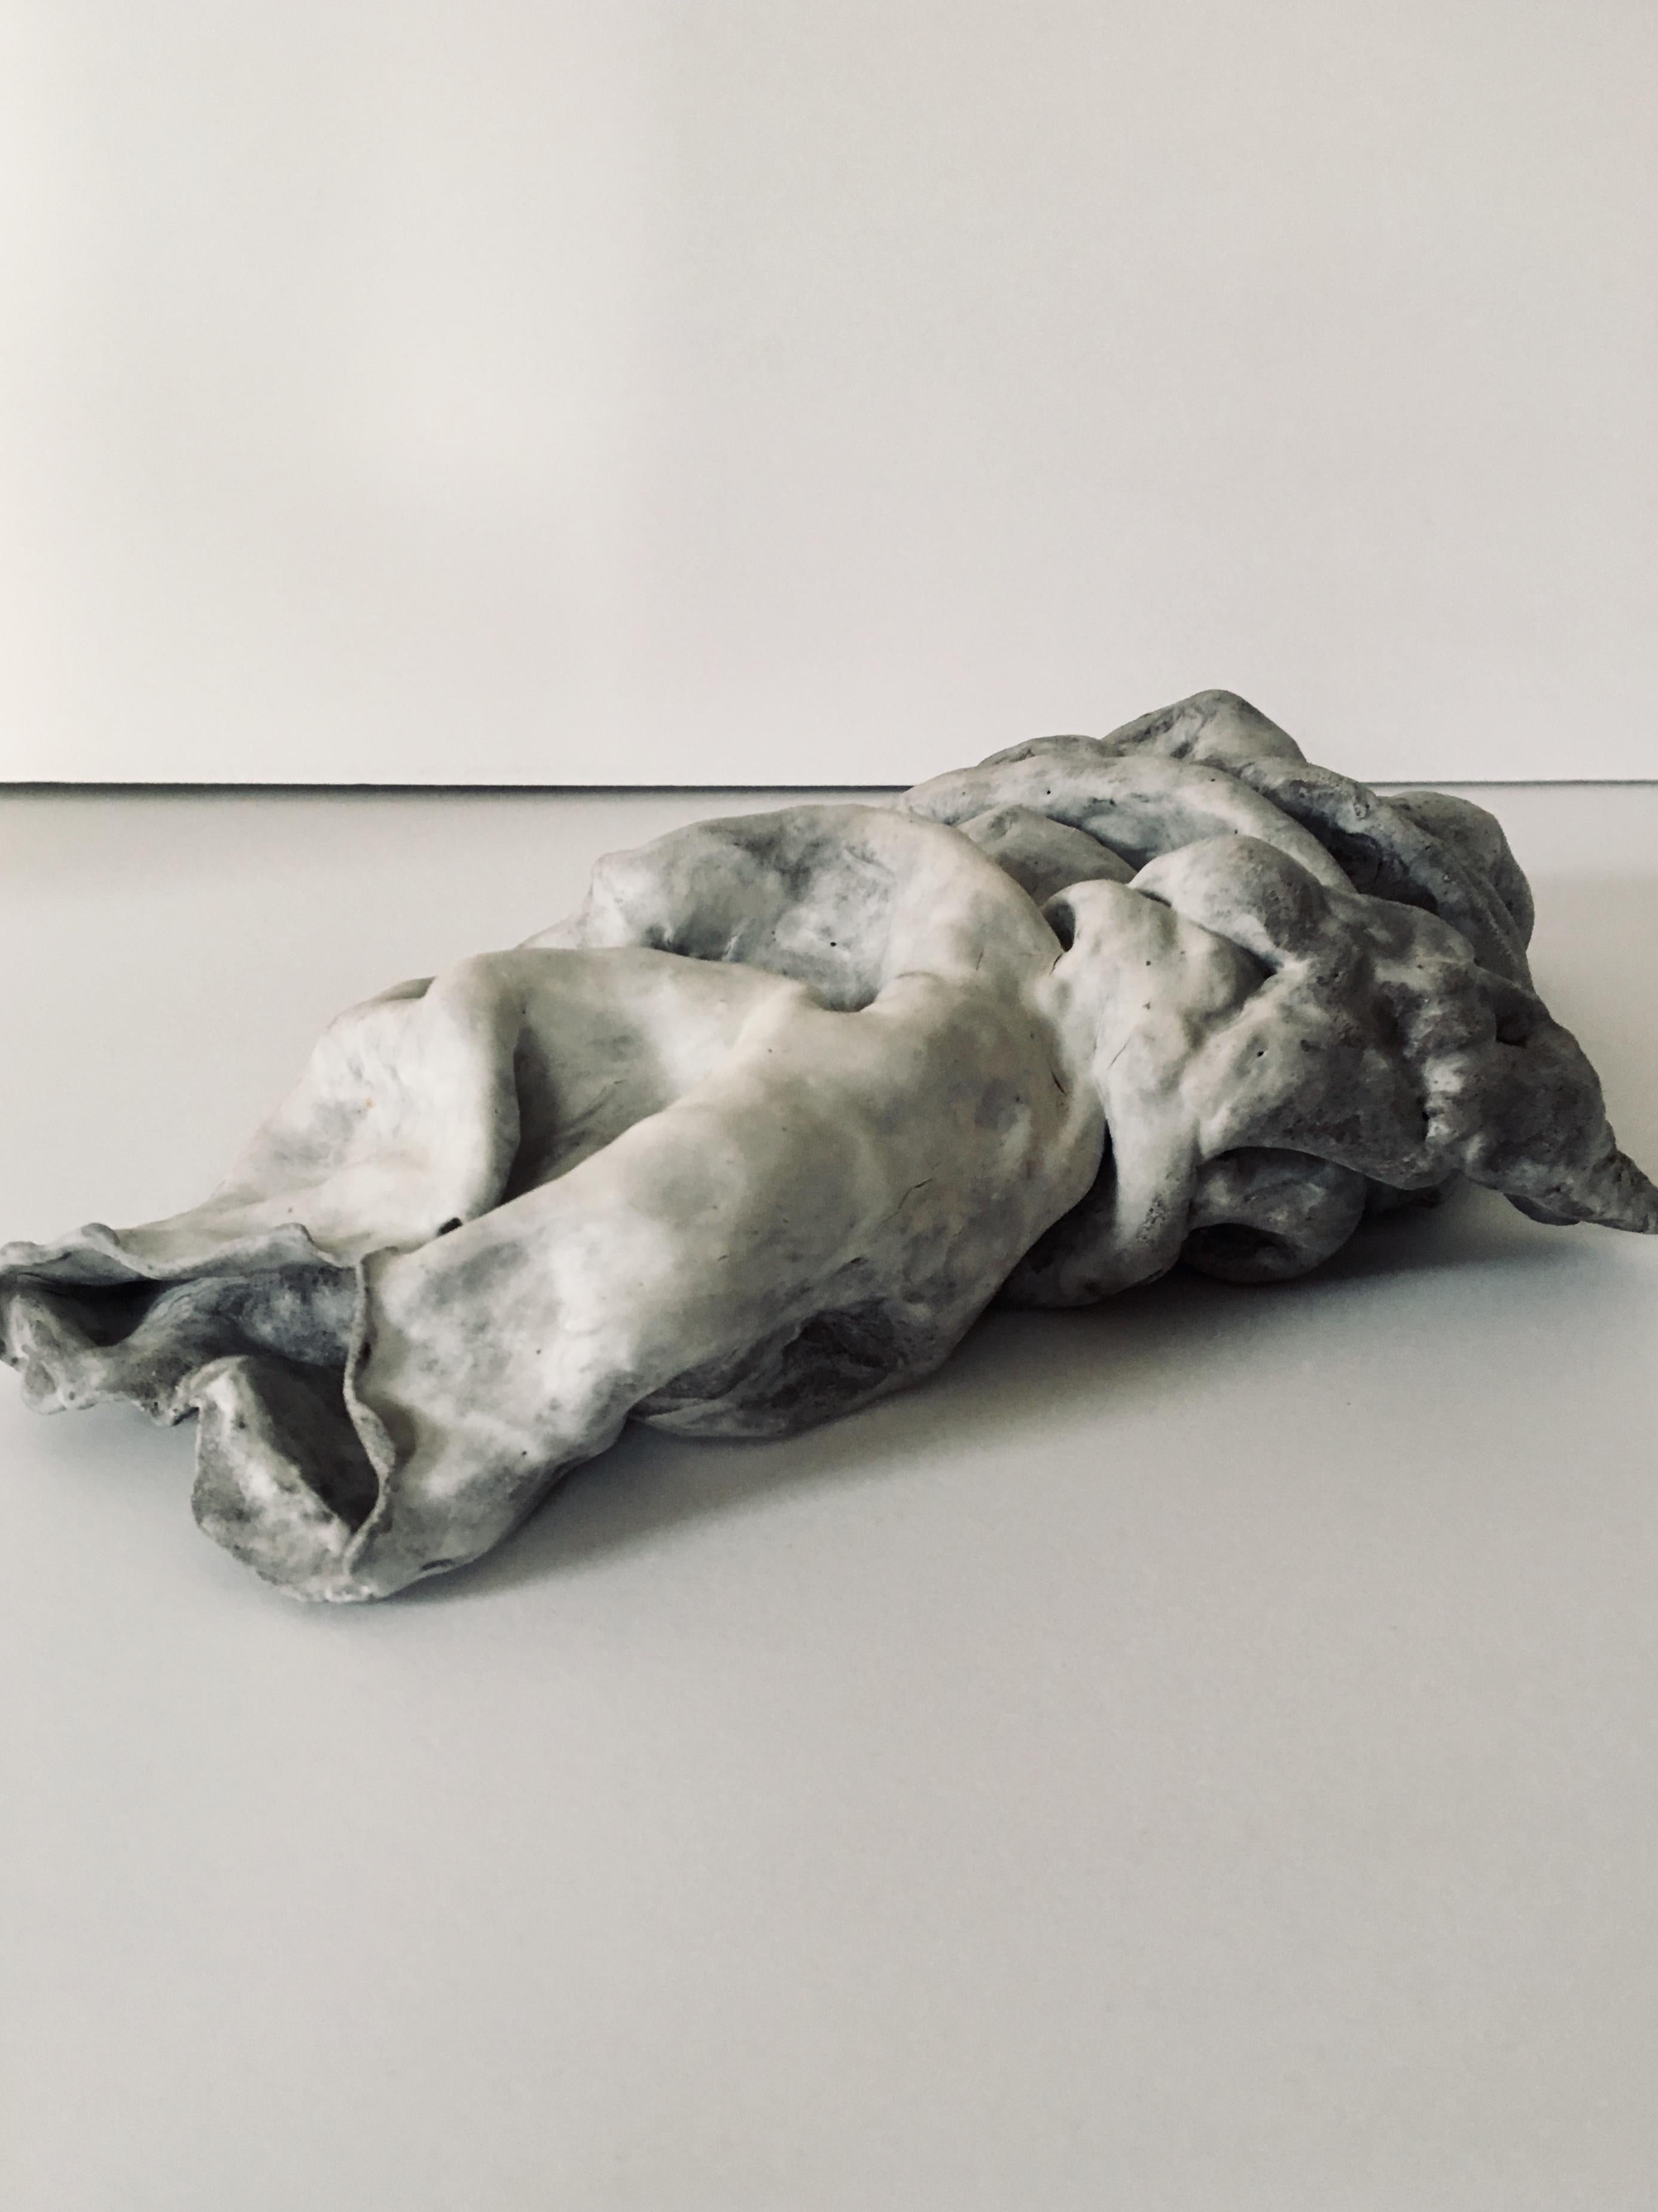 Ceramic figure lying down, sculpture: Figurative 'Wasted' 3